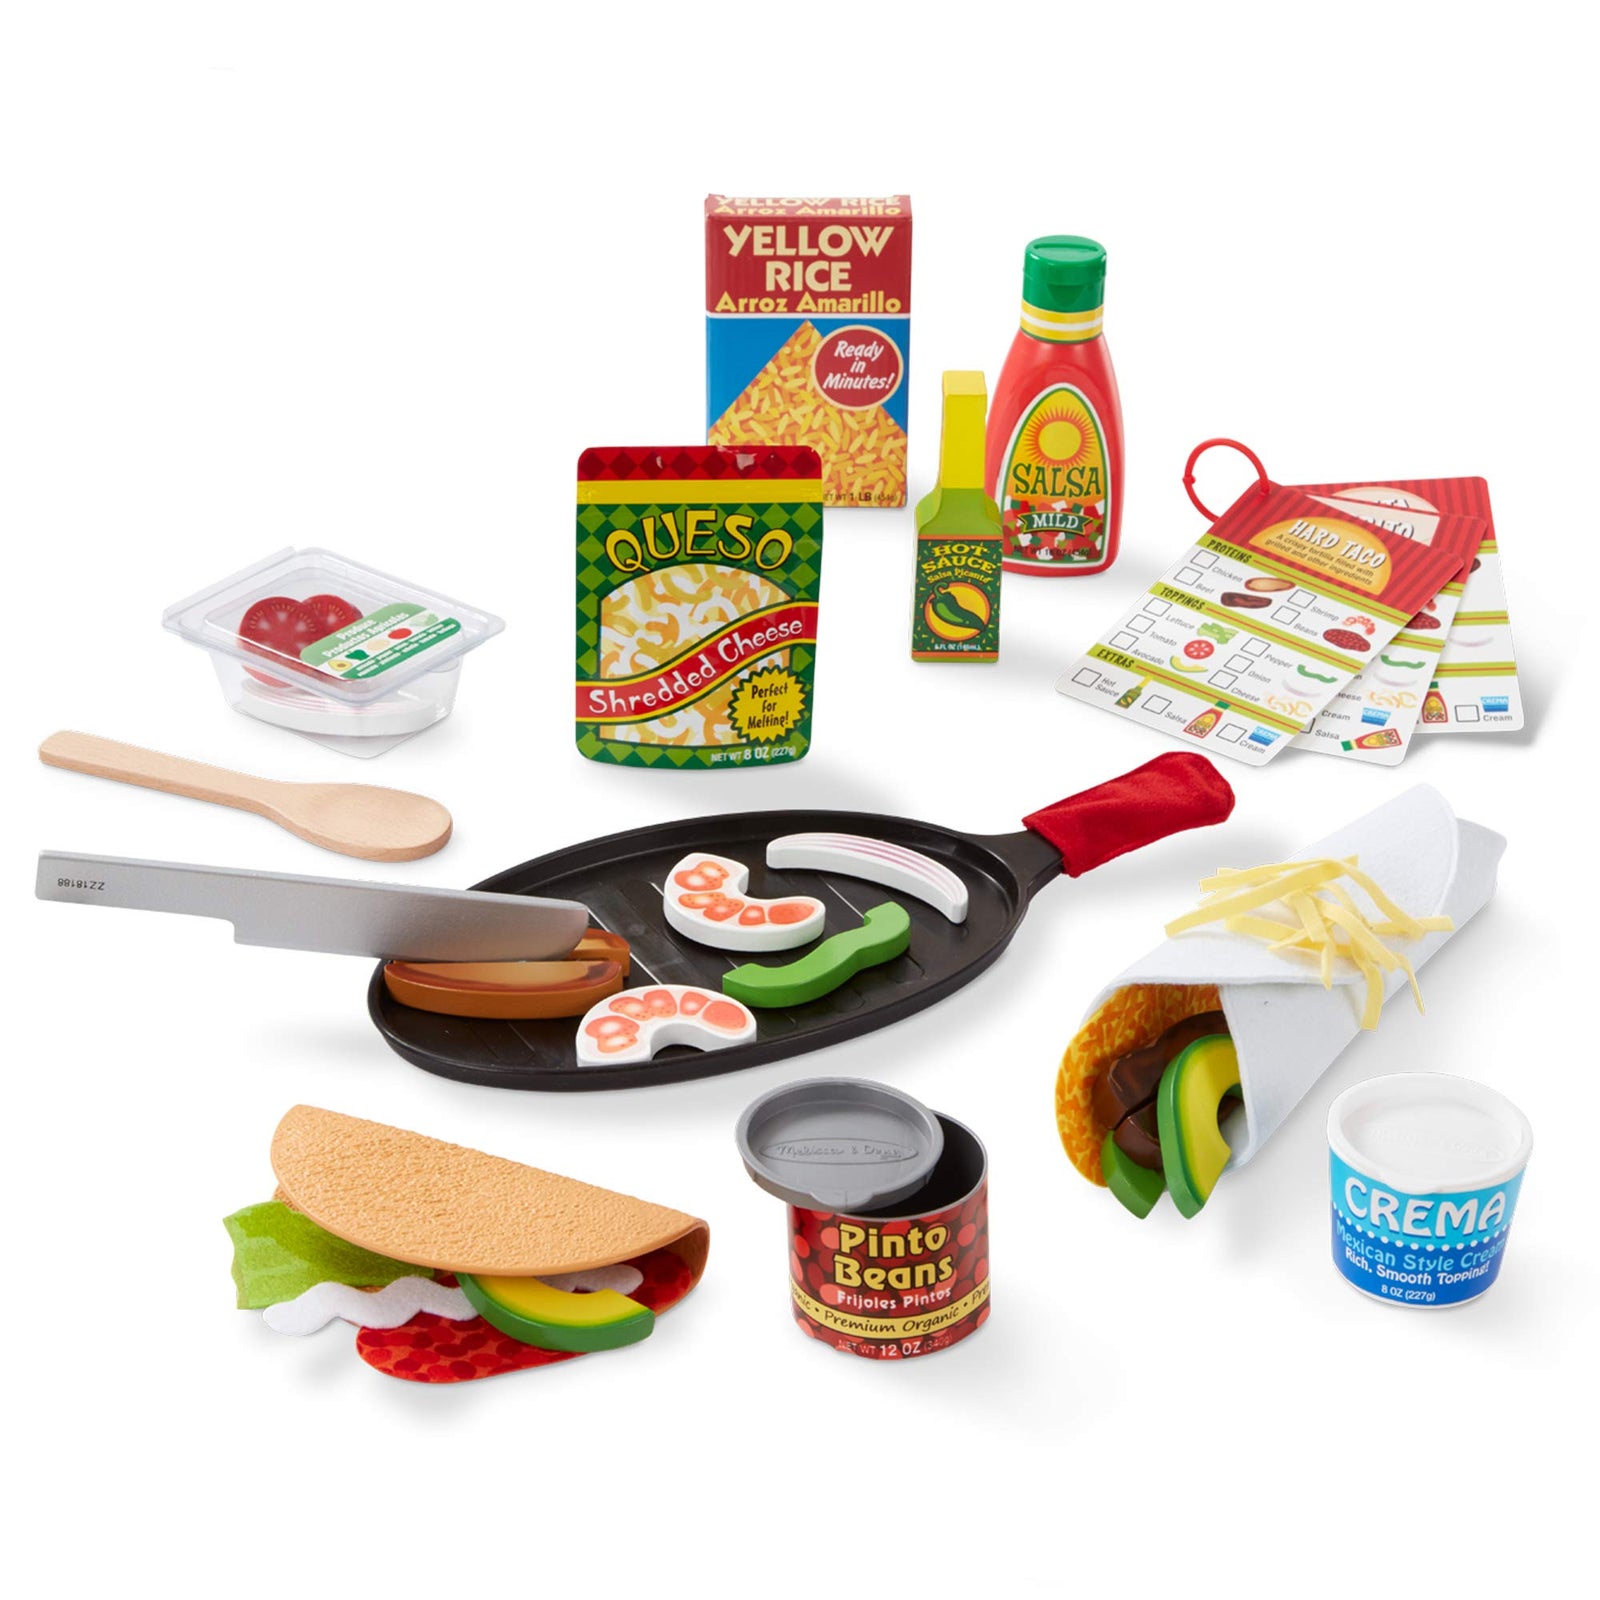 Melissa & Doug Fill & Fold Taco & Tortilla Set, 43 Pieces – Sliceable Wooden Mexican Play Food, Skillet, and More